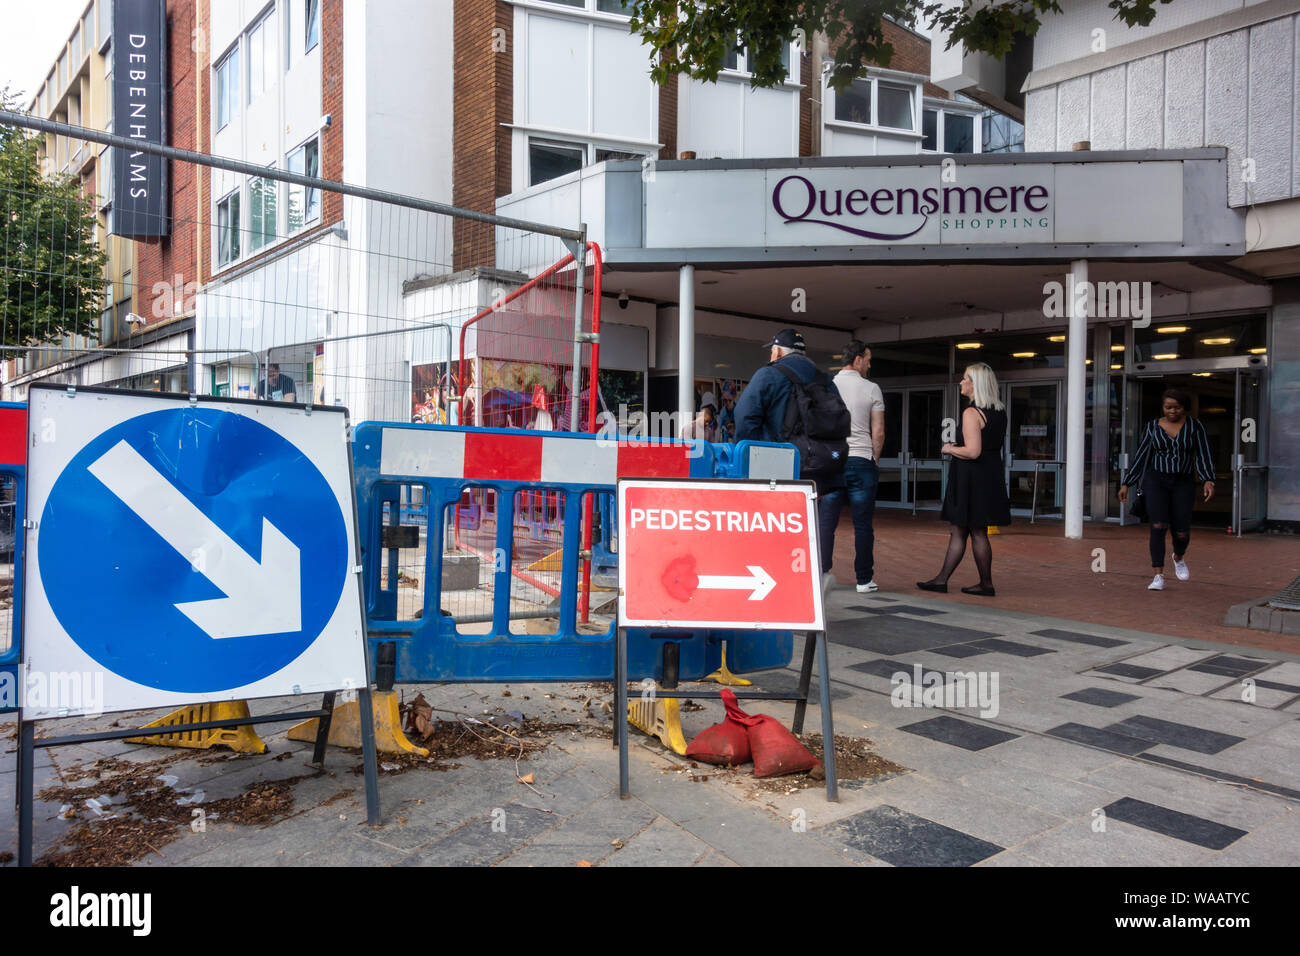 Maintenance works in the road in front of an entrance to The Queensmere shopping centre on High Street, Slough, UK Stock Photo